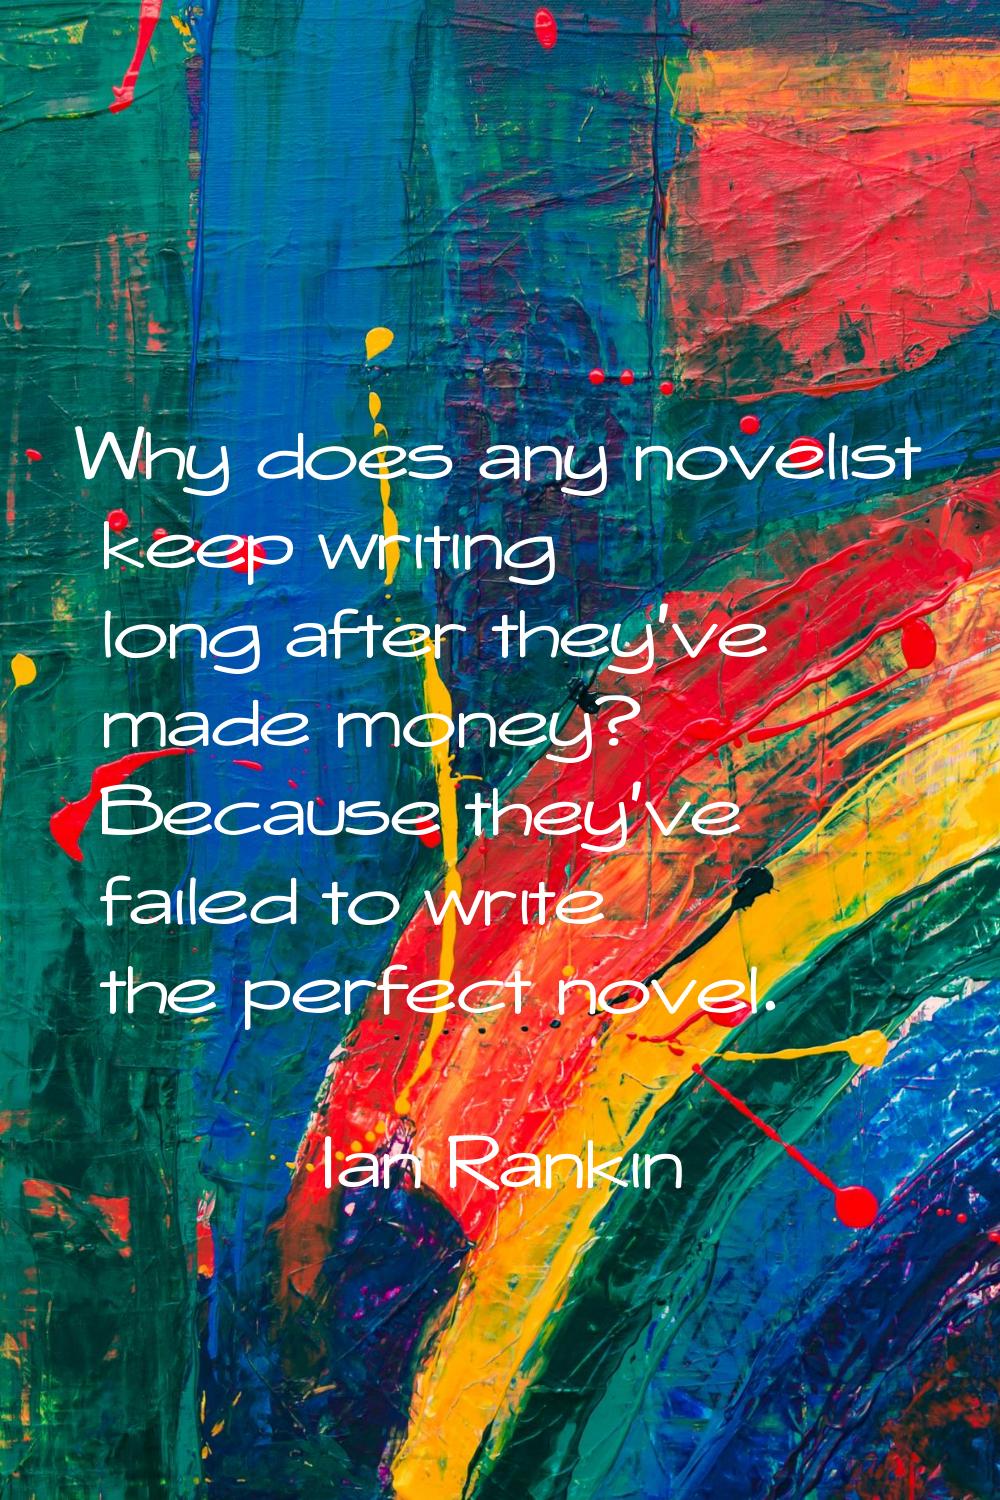 Why does any novelist keep writing long after they've made money? Because they've failed to write t